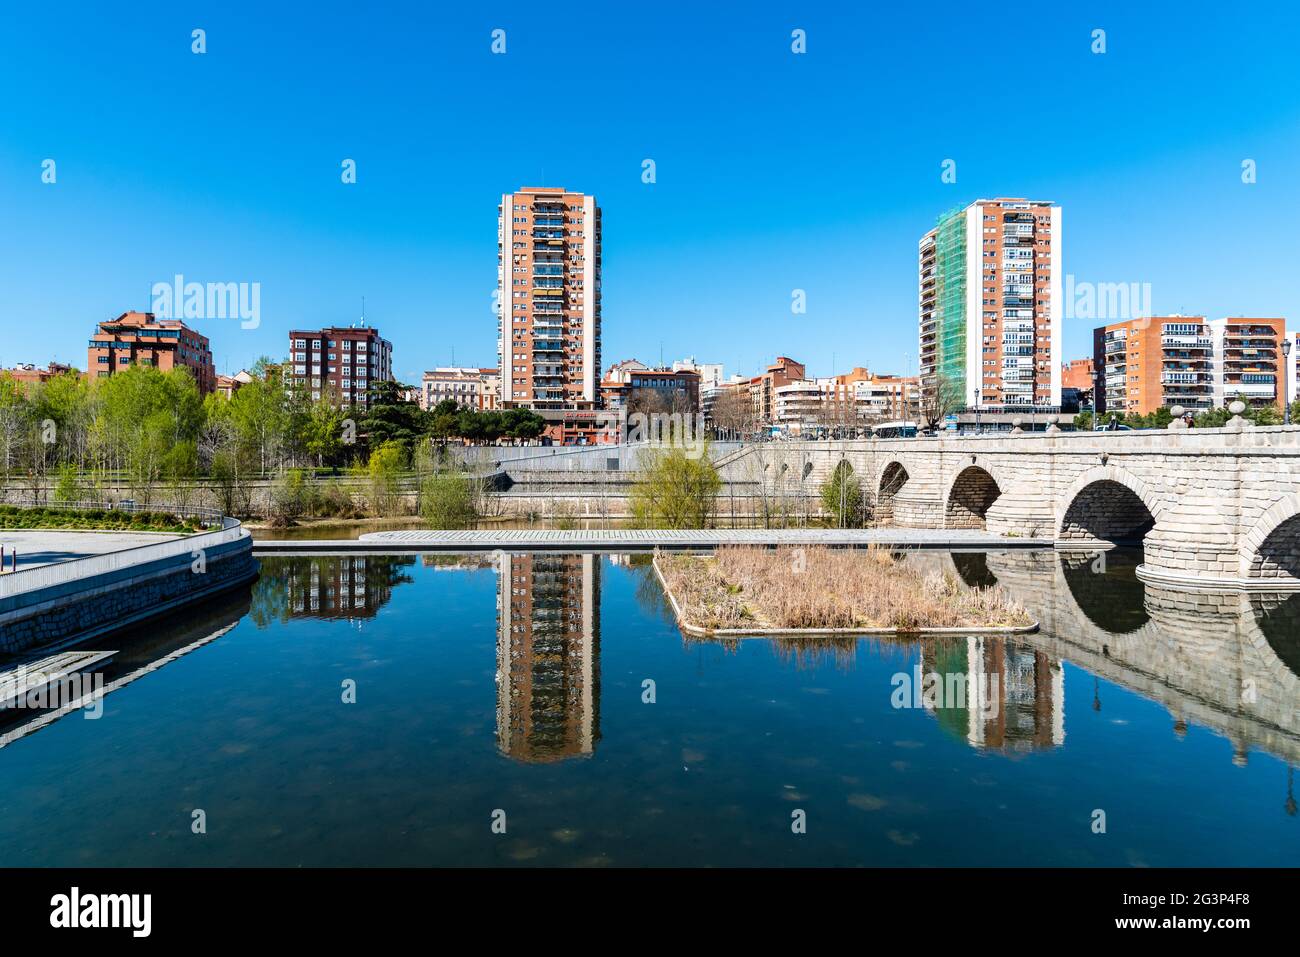 Madrid, Spain - March 14, 2021: Madrid Rio. Bridge of Segovia and Puerta del Angel quarter. Reflections of residential towers on water Stock Photo